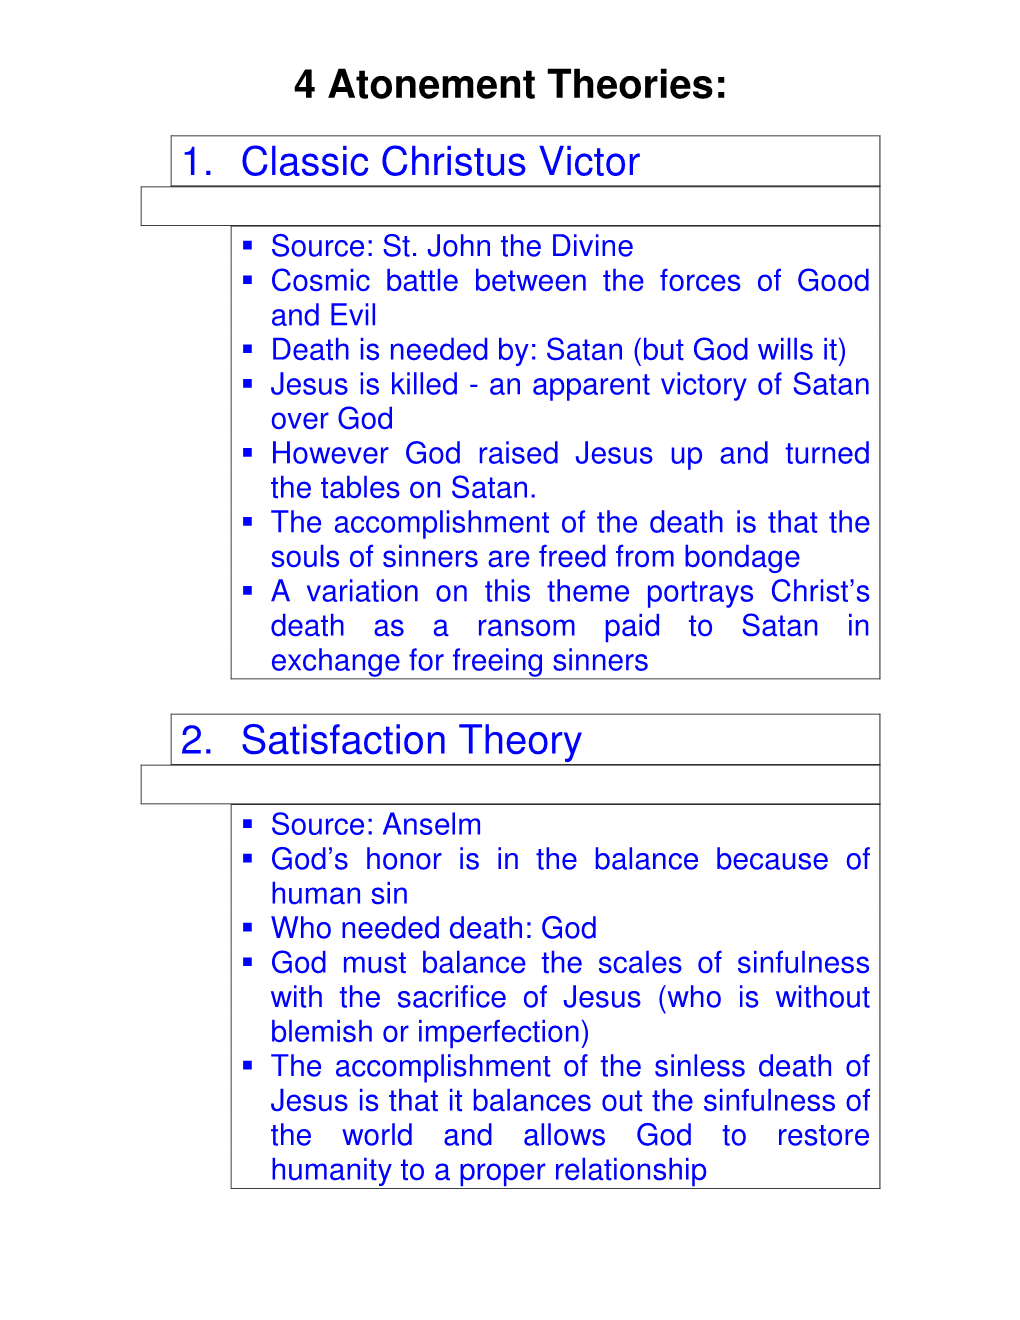 4 Atonement Theories: 1. Classic Christus Victor 2. Satisfaction Theory